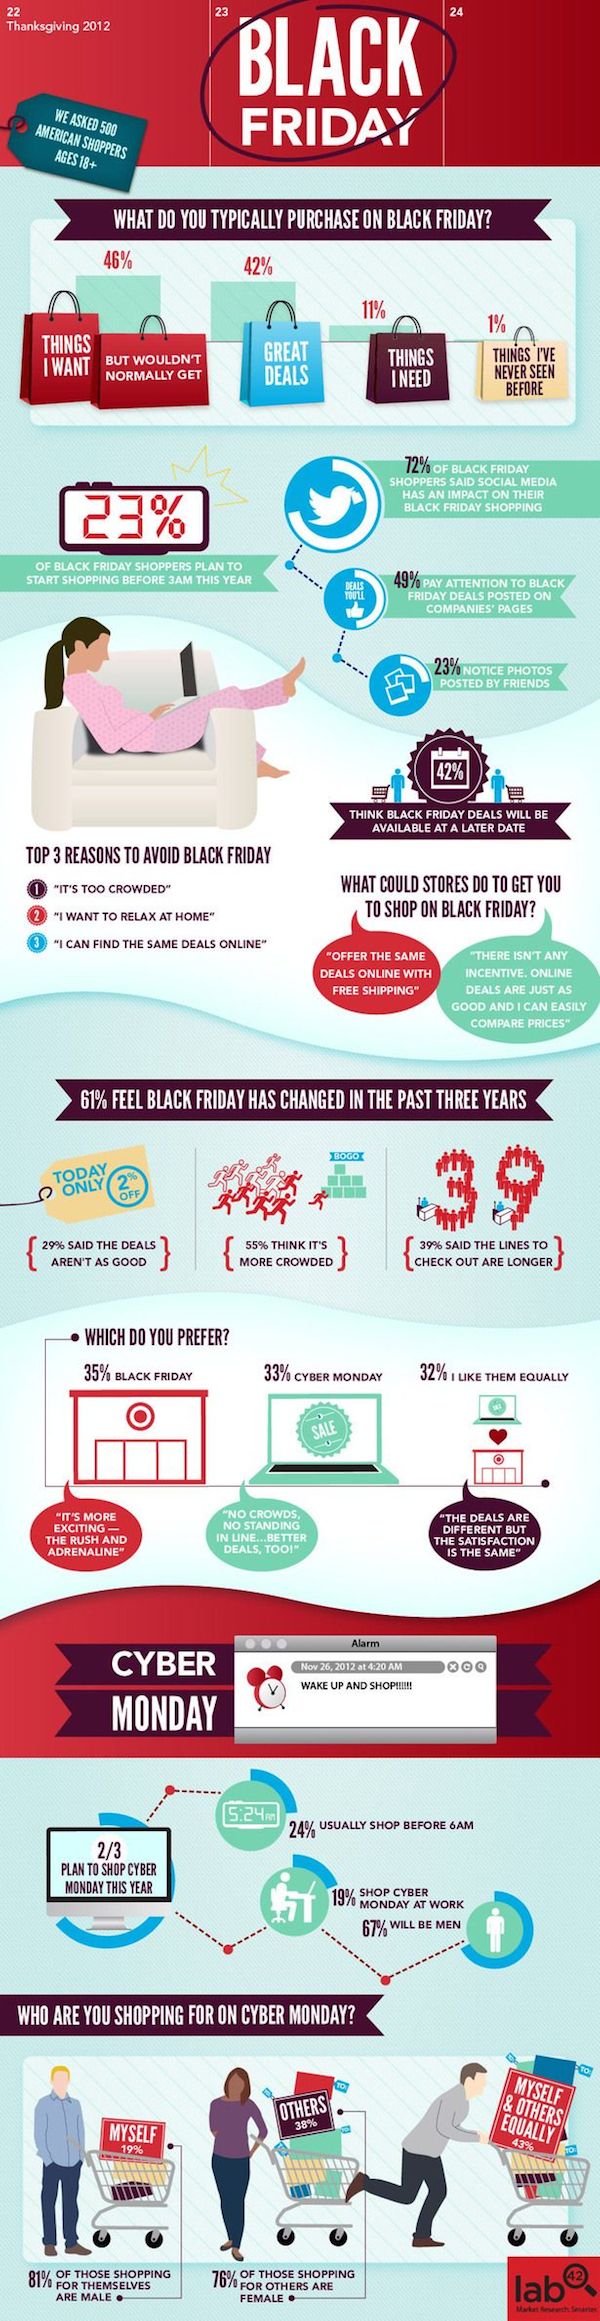 20 Black Friday And Cyber Monday Infographics image 12.jpg